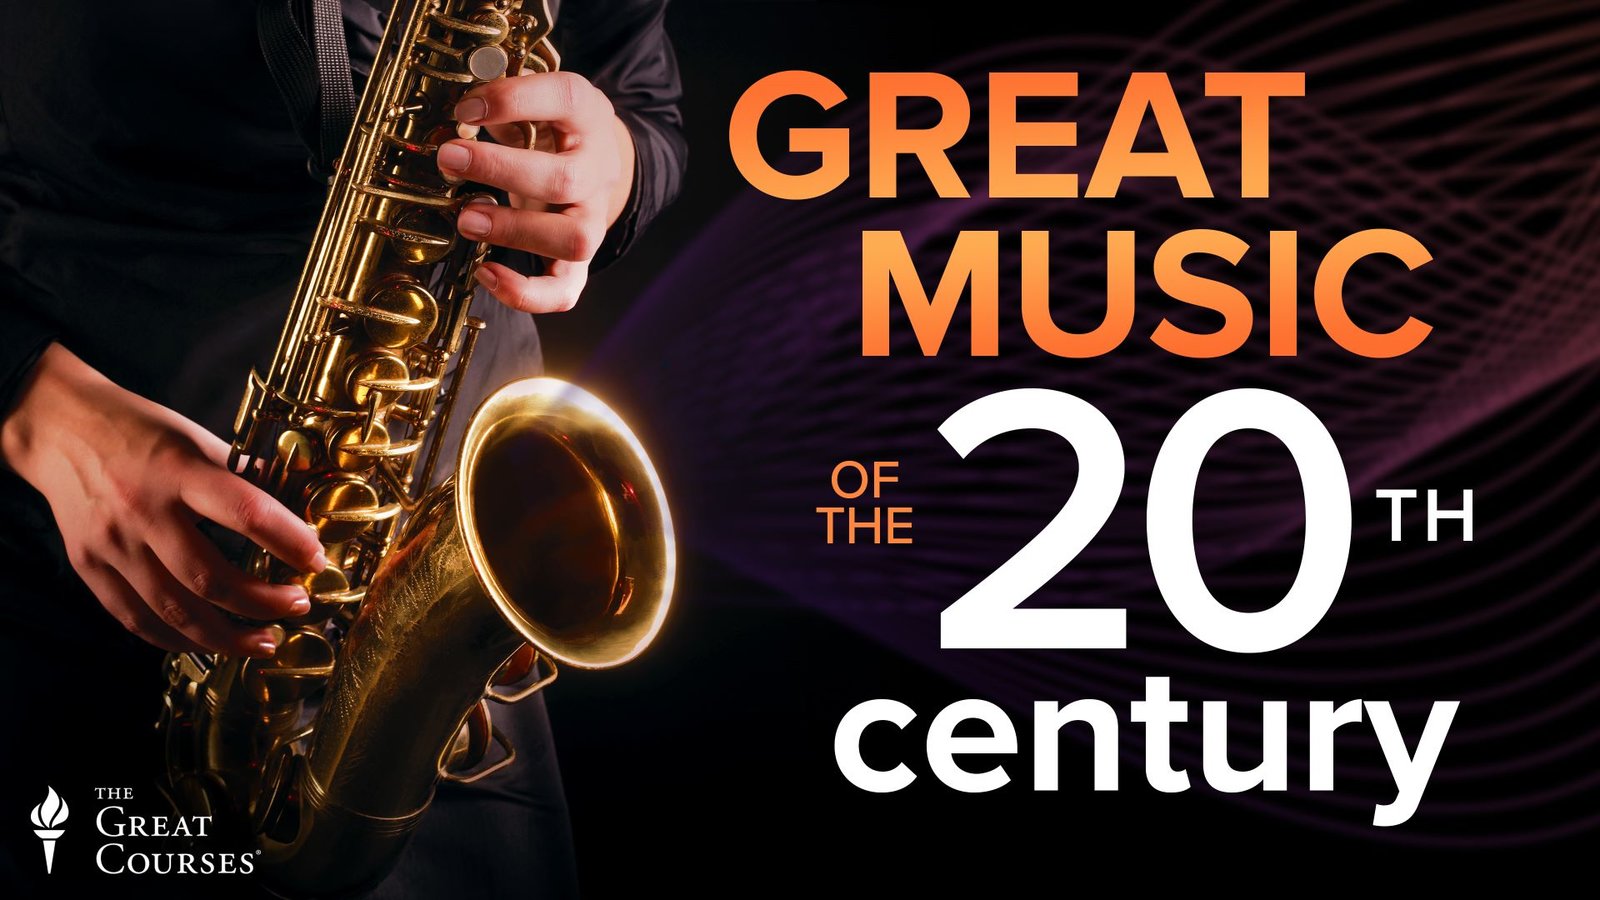 Great Music of the 20th Century | Kanopy